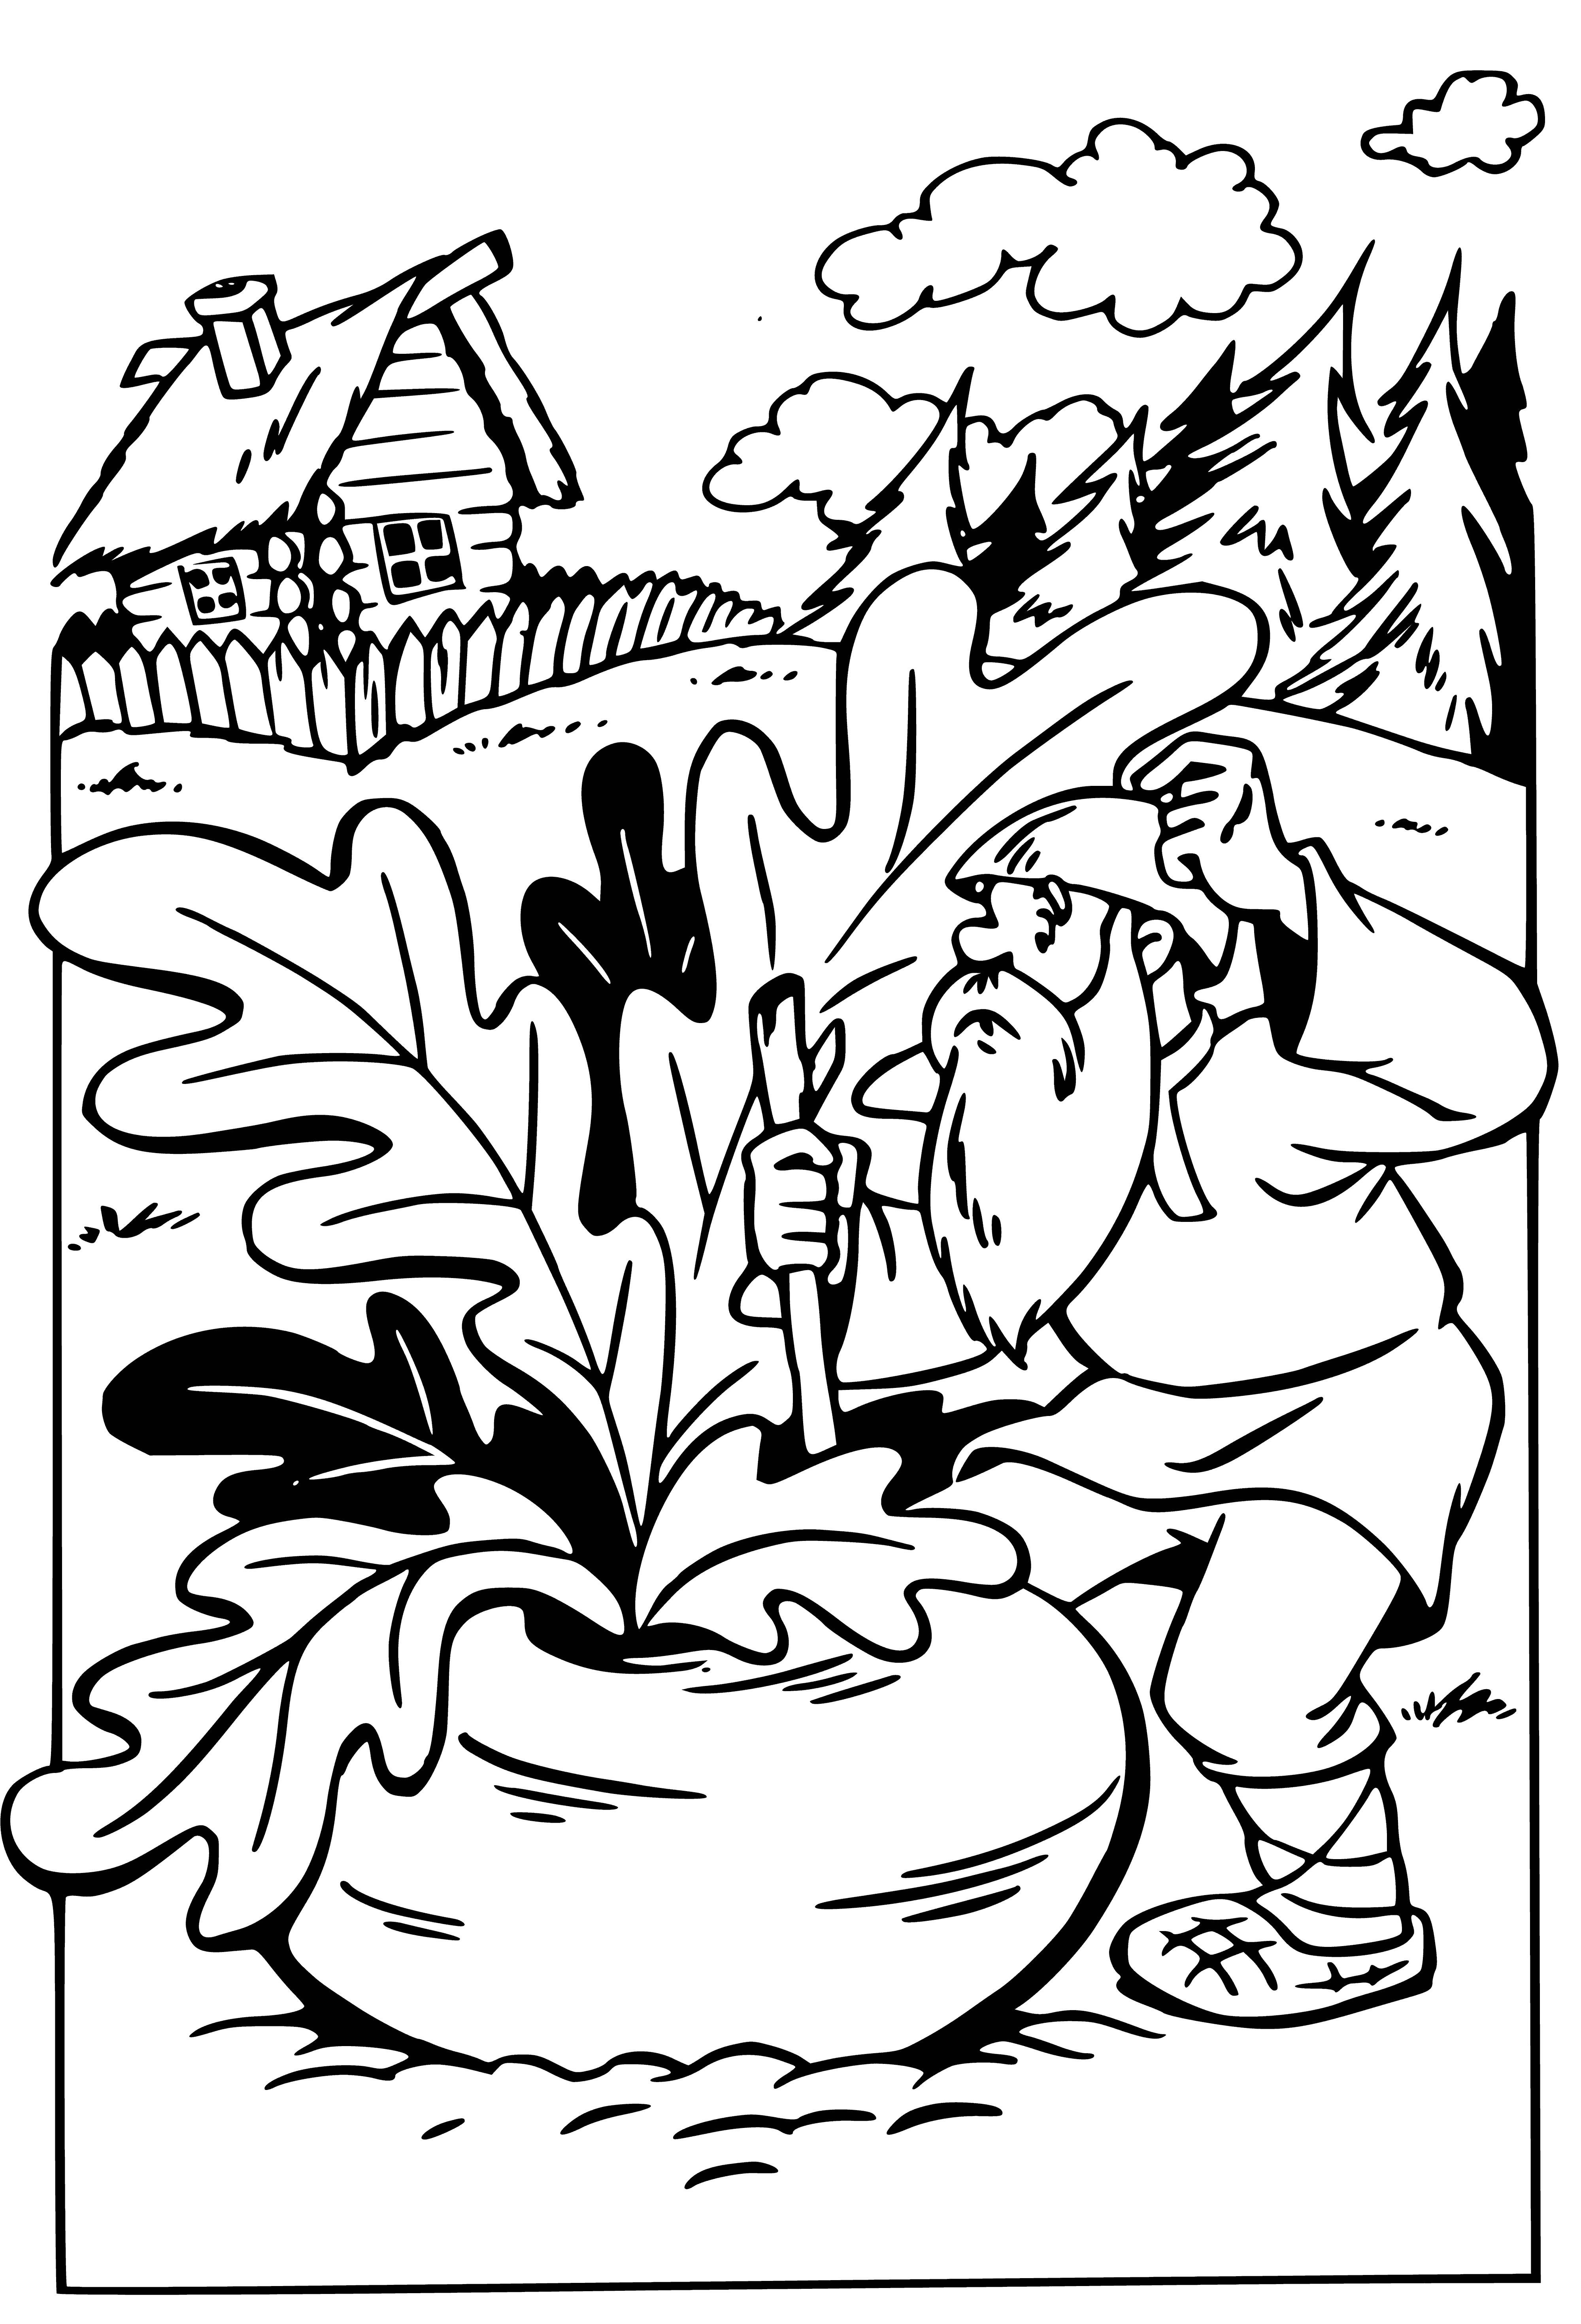 A turnip has grown coloring page